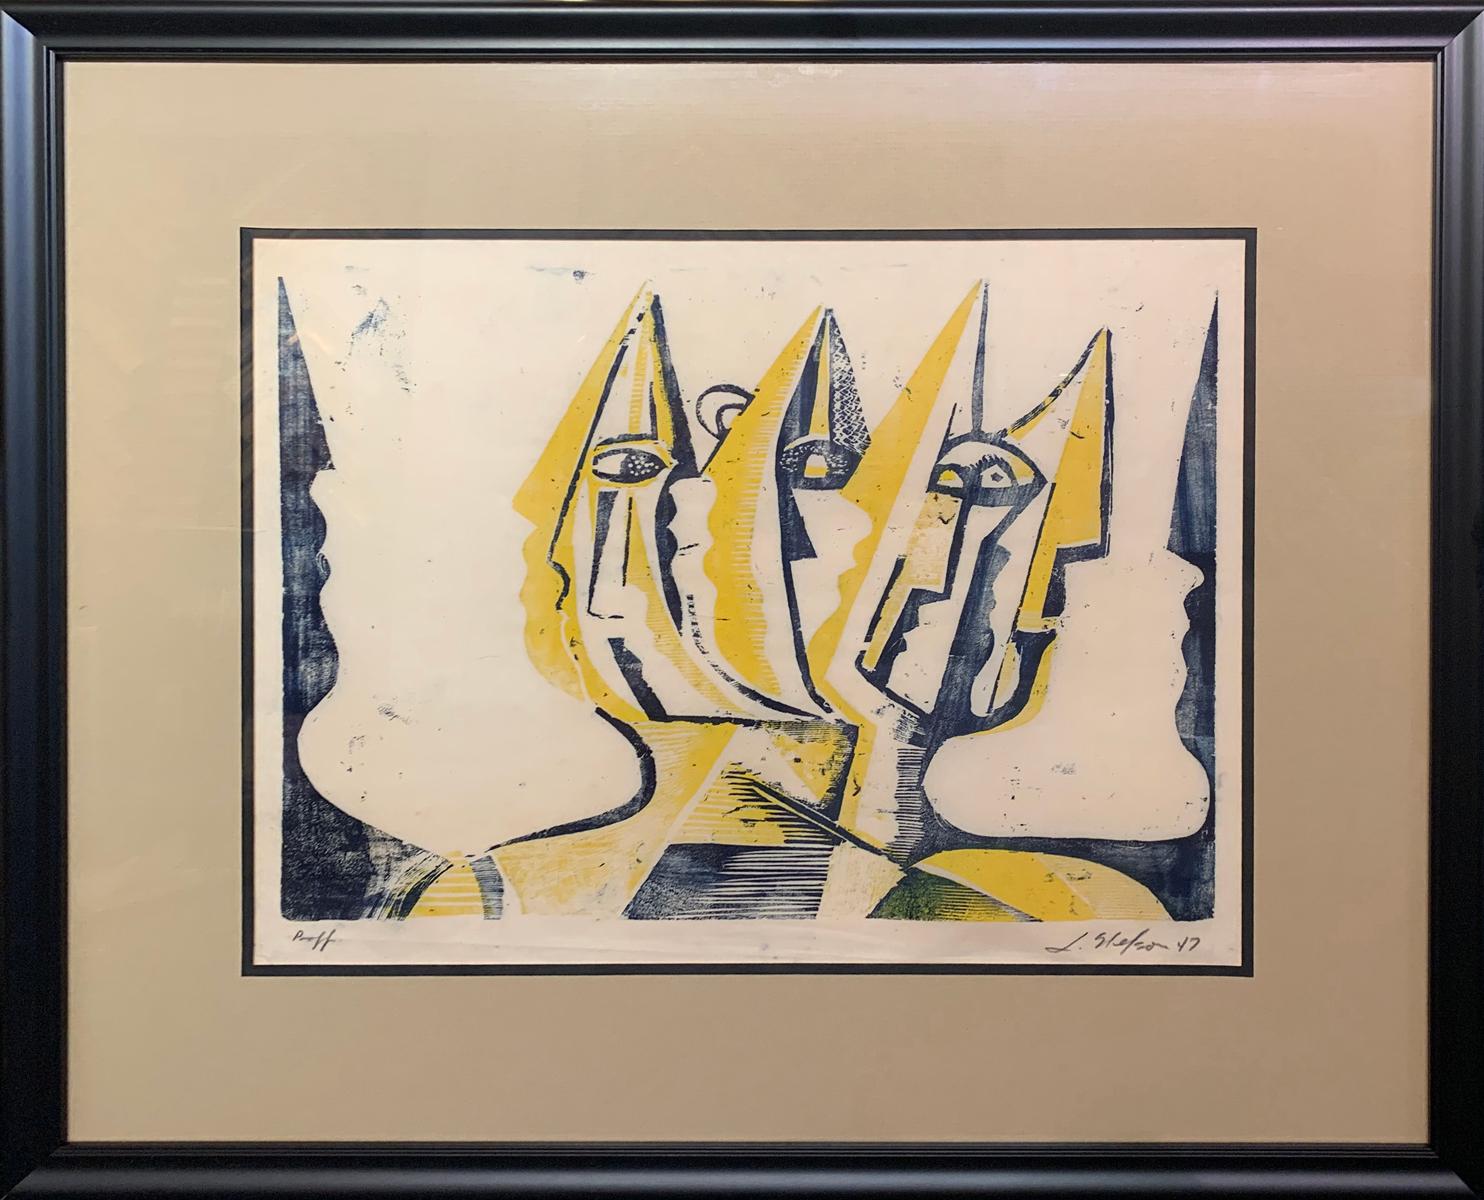 "Three Figues" by Leonard Nelson is an original 13" x 17" woodblock print from 1947.  It is signed "L Nelson 47" in the lower right, and it comes from a private collection in New Hope, Pennsylvania. Additional shipping options and quotes by the